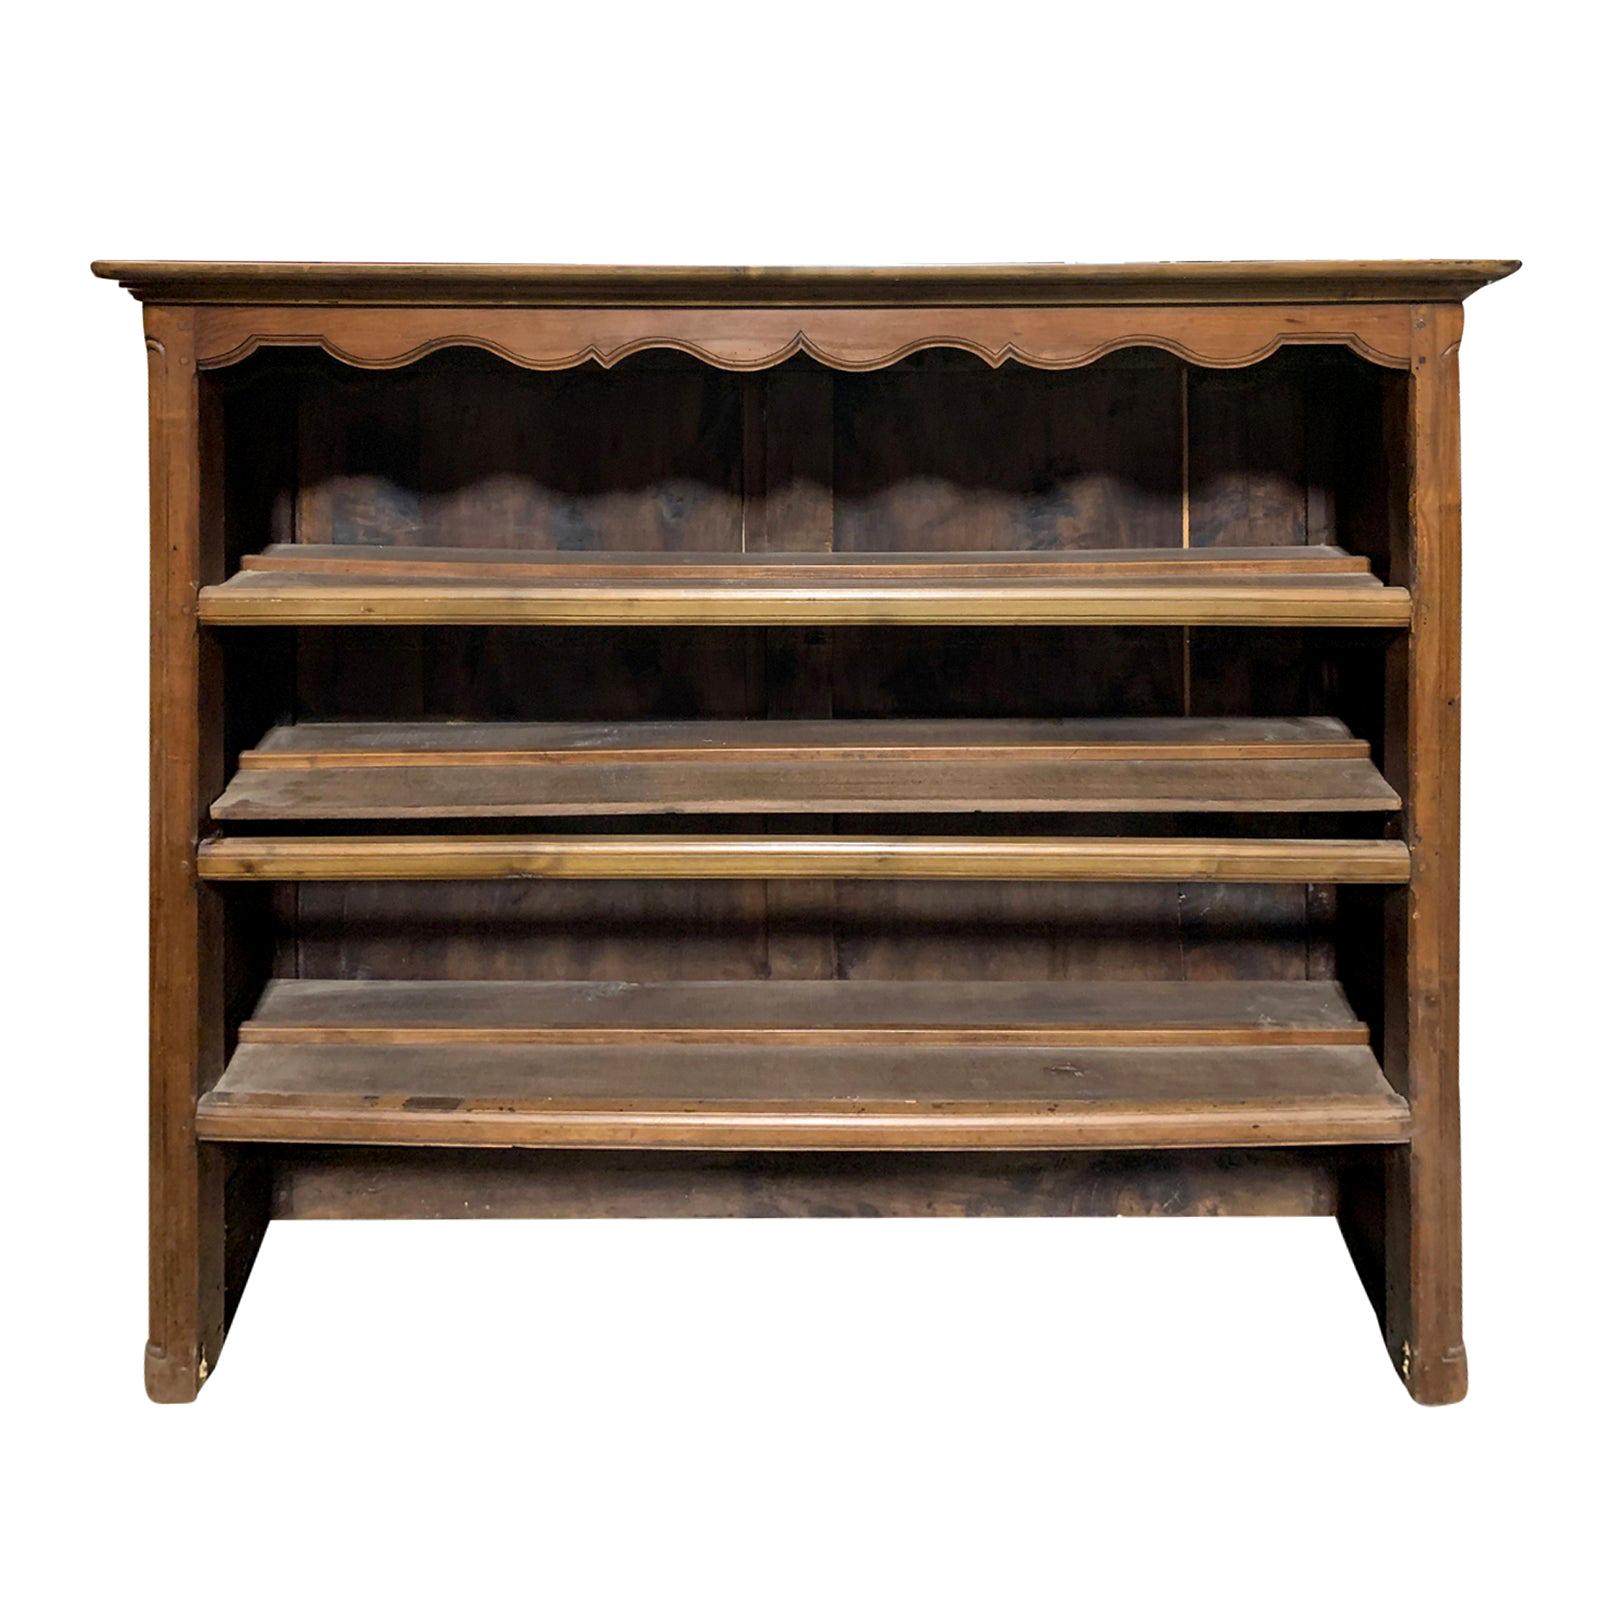 19th Century French Dresser Top with Three Shelves, Scalloped Edge